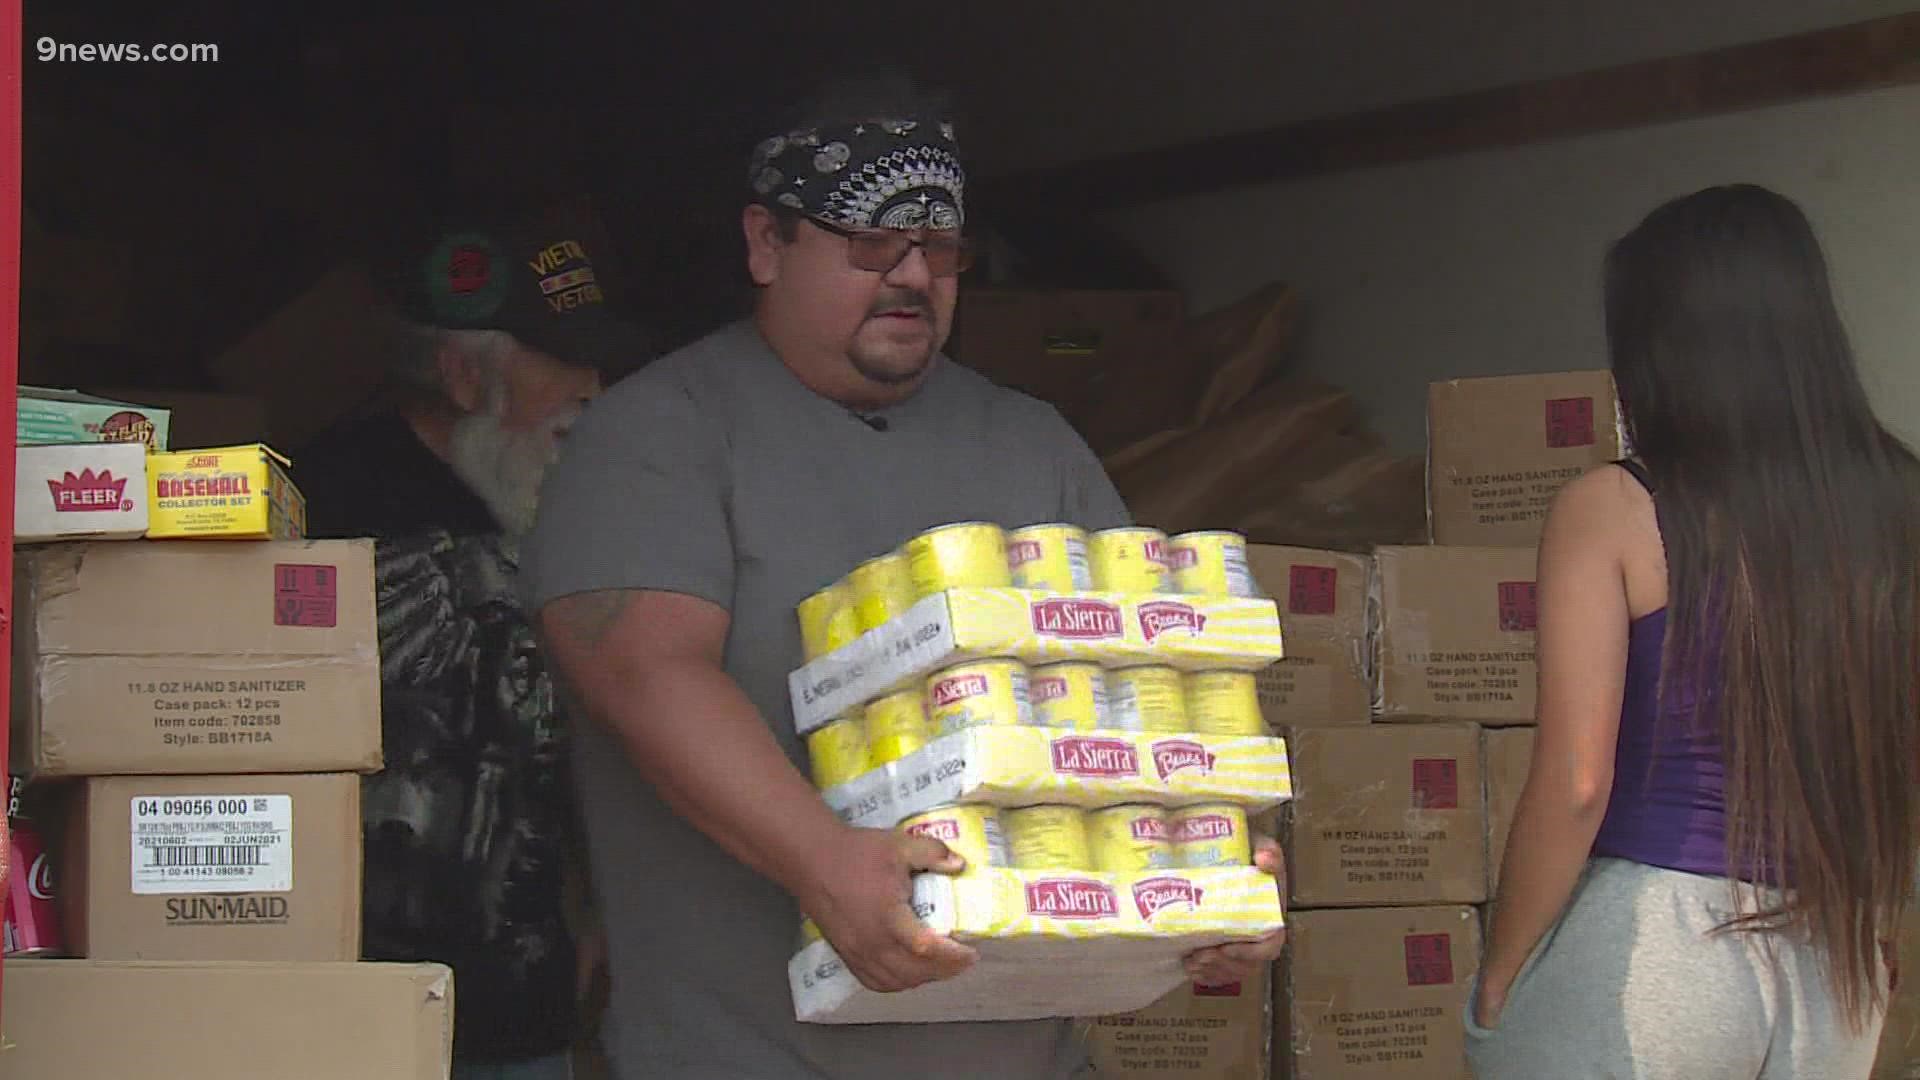 Colorado Creating Change is driving to Louisiana to help people impacted by Hurricane Ida.